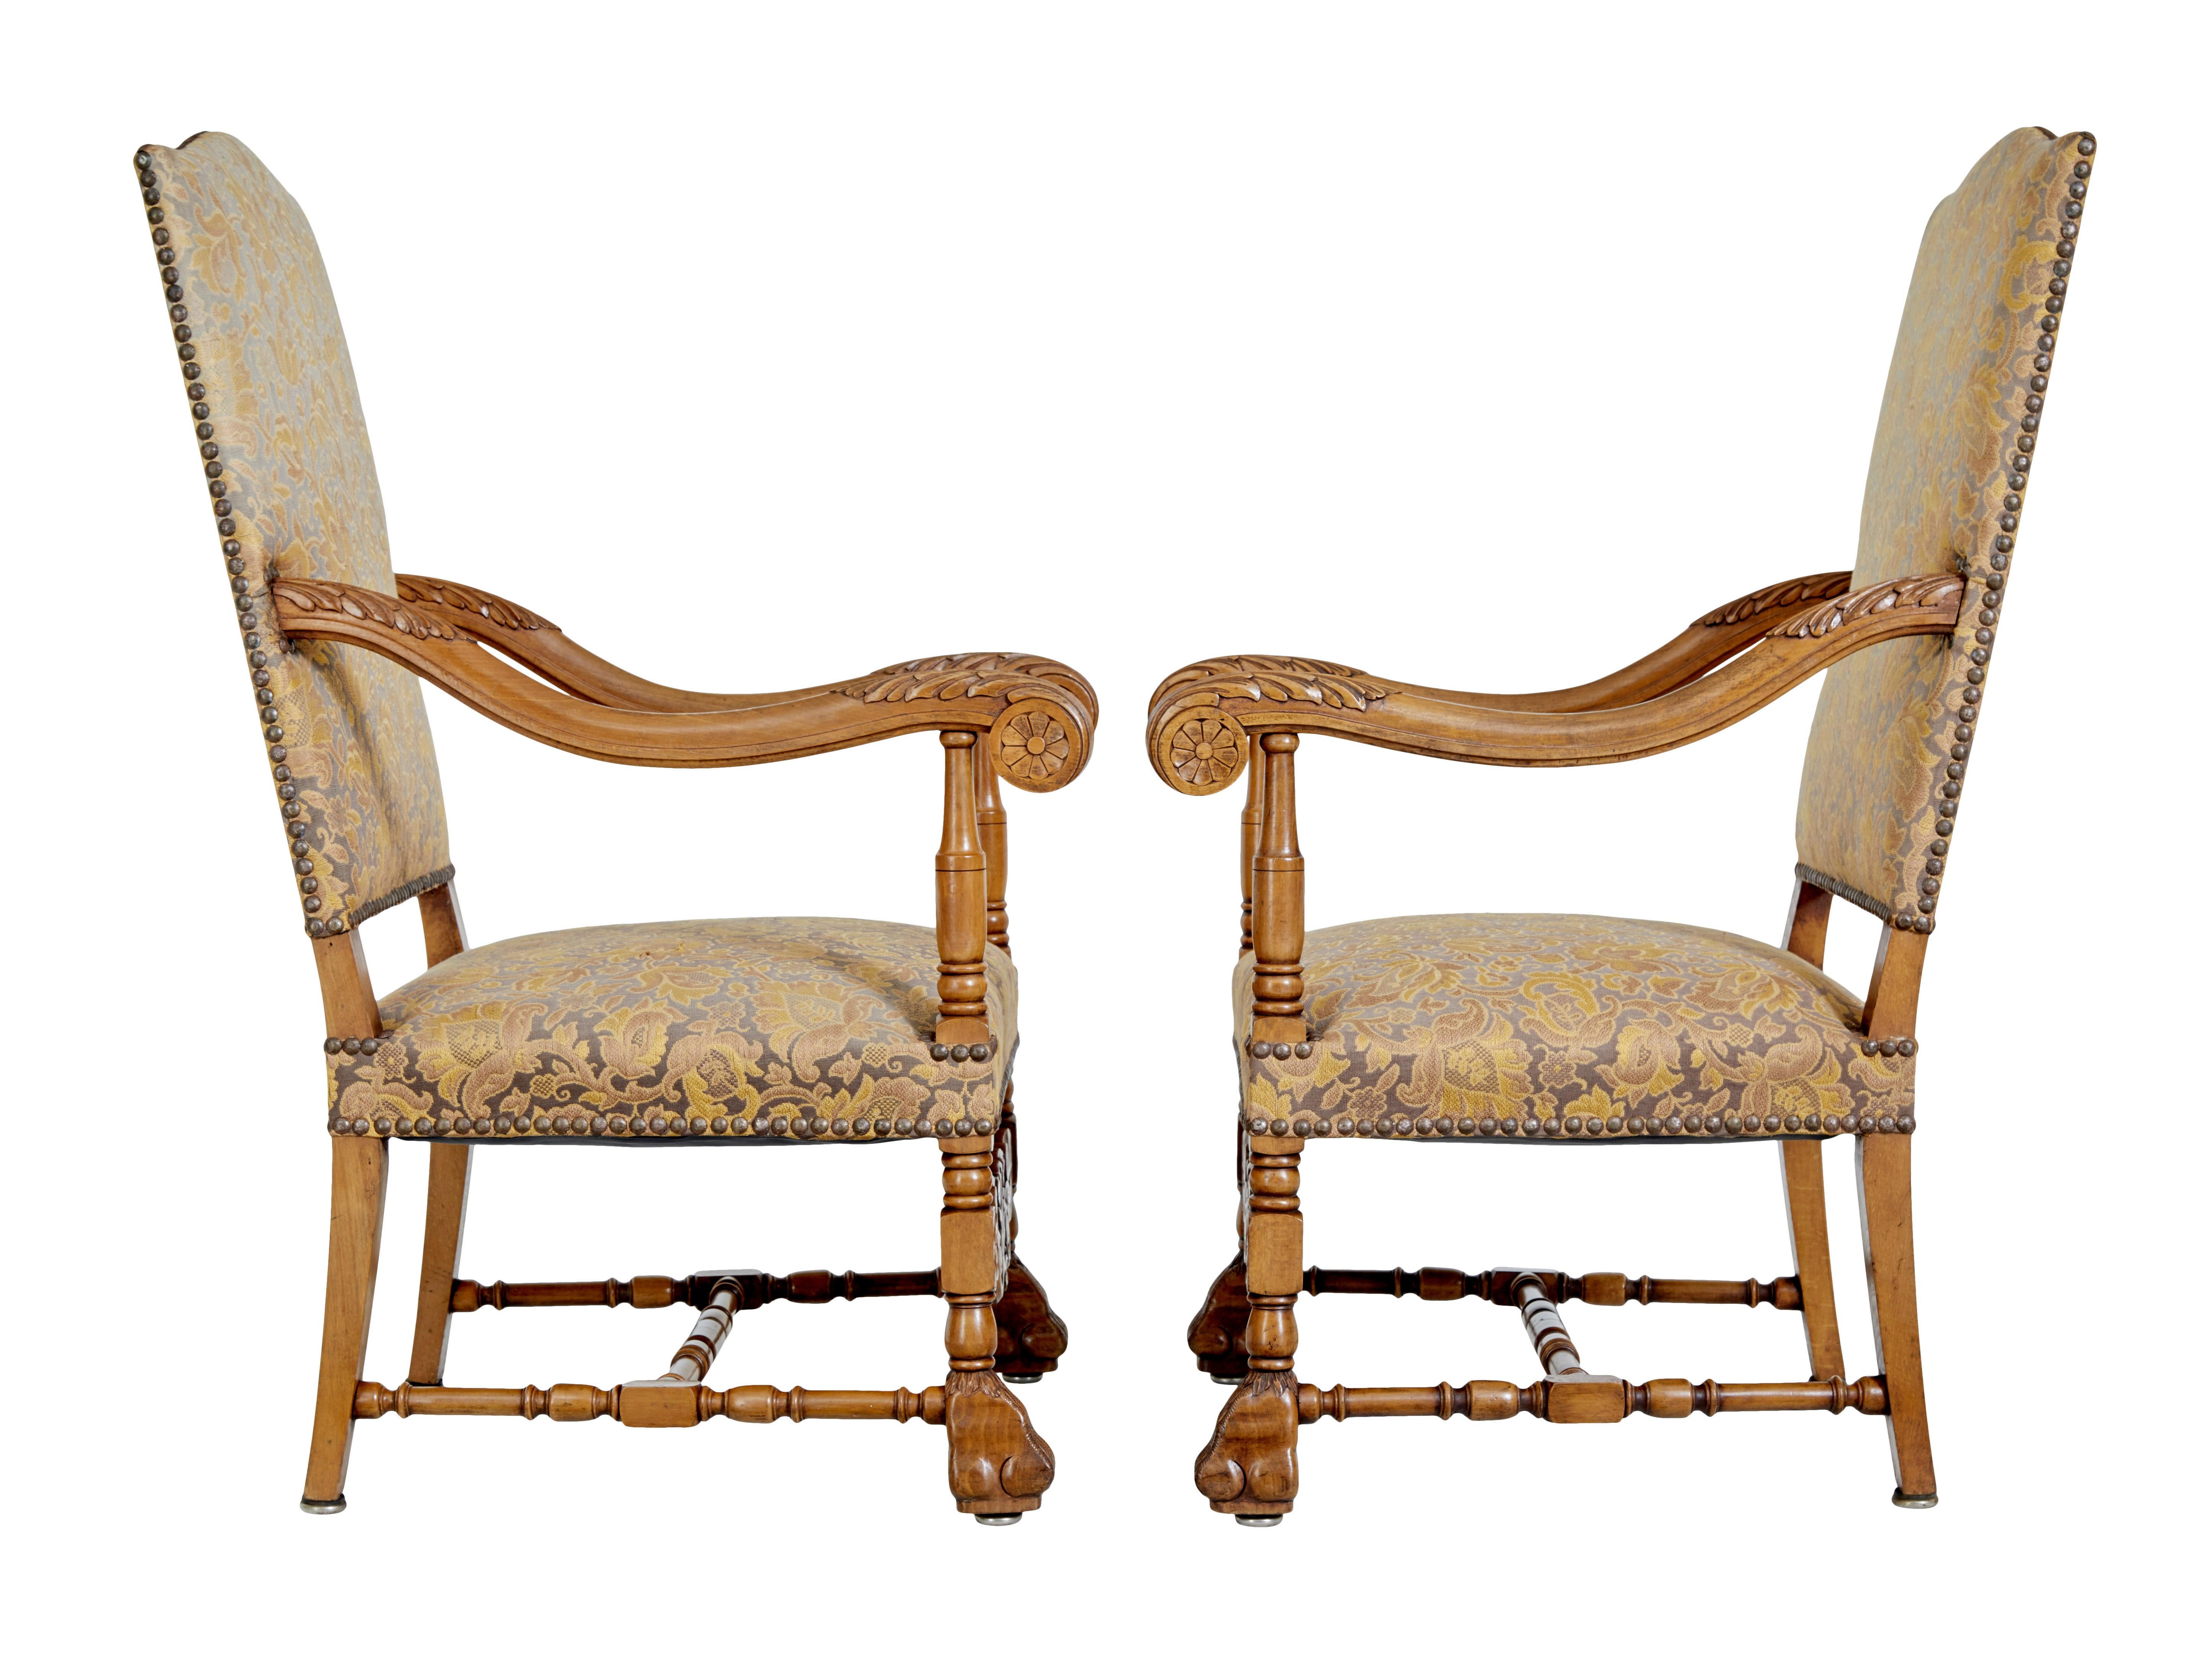 Carved Pair of 19th century carved French baroque throne armchairs